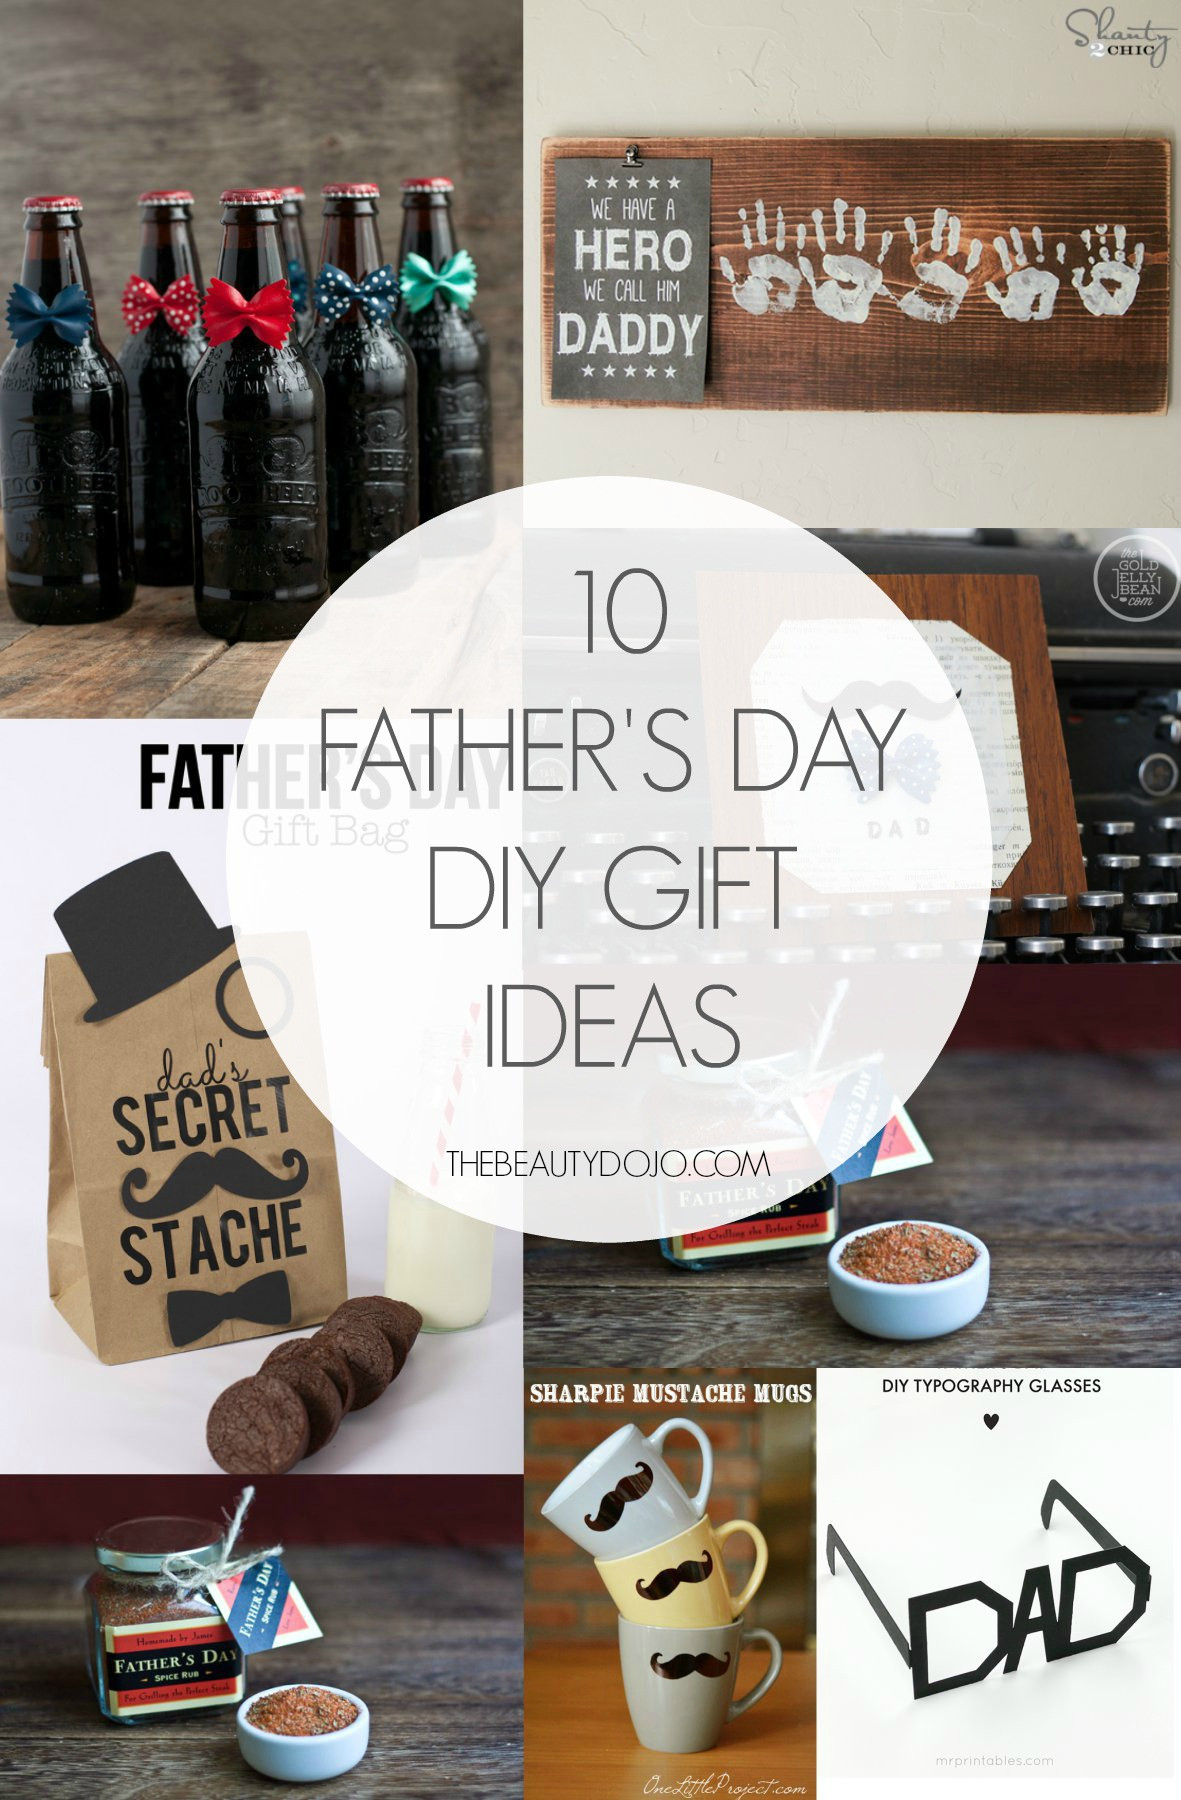 A Good Mother's Day Gift
 10 Father s Day DIY Gift Ideas The Beautydojo